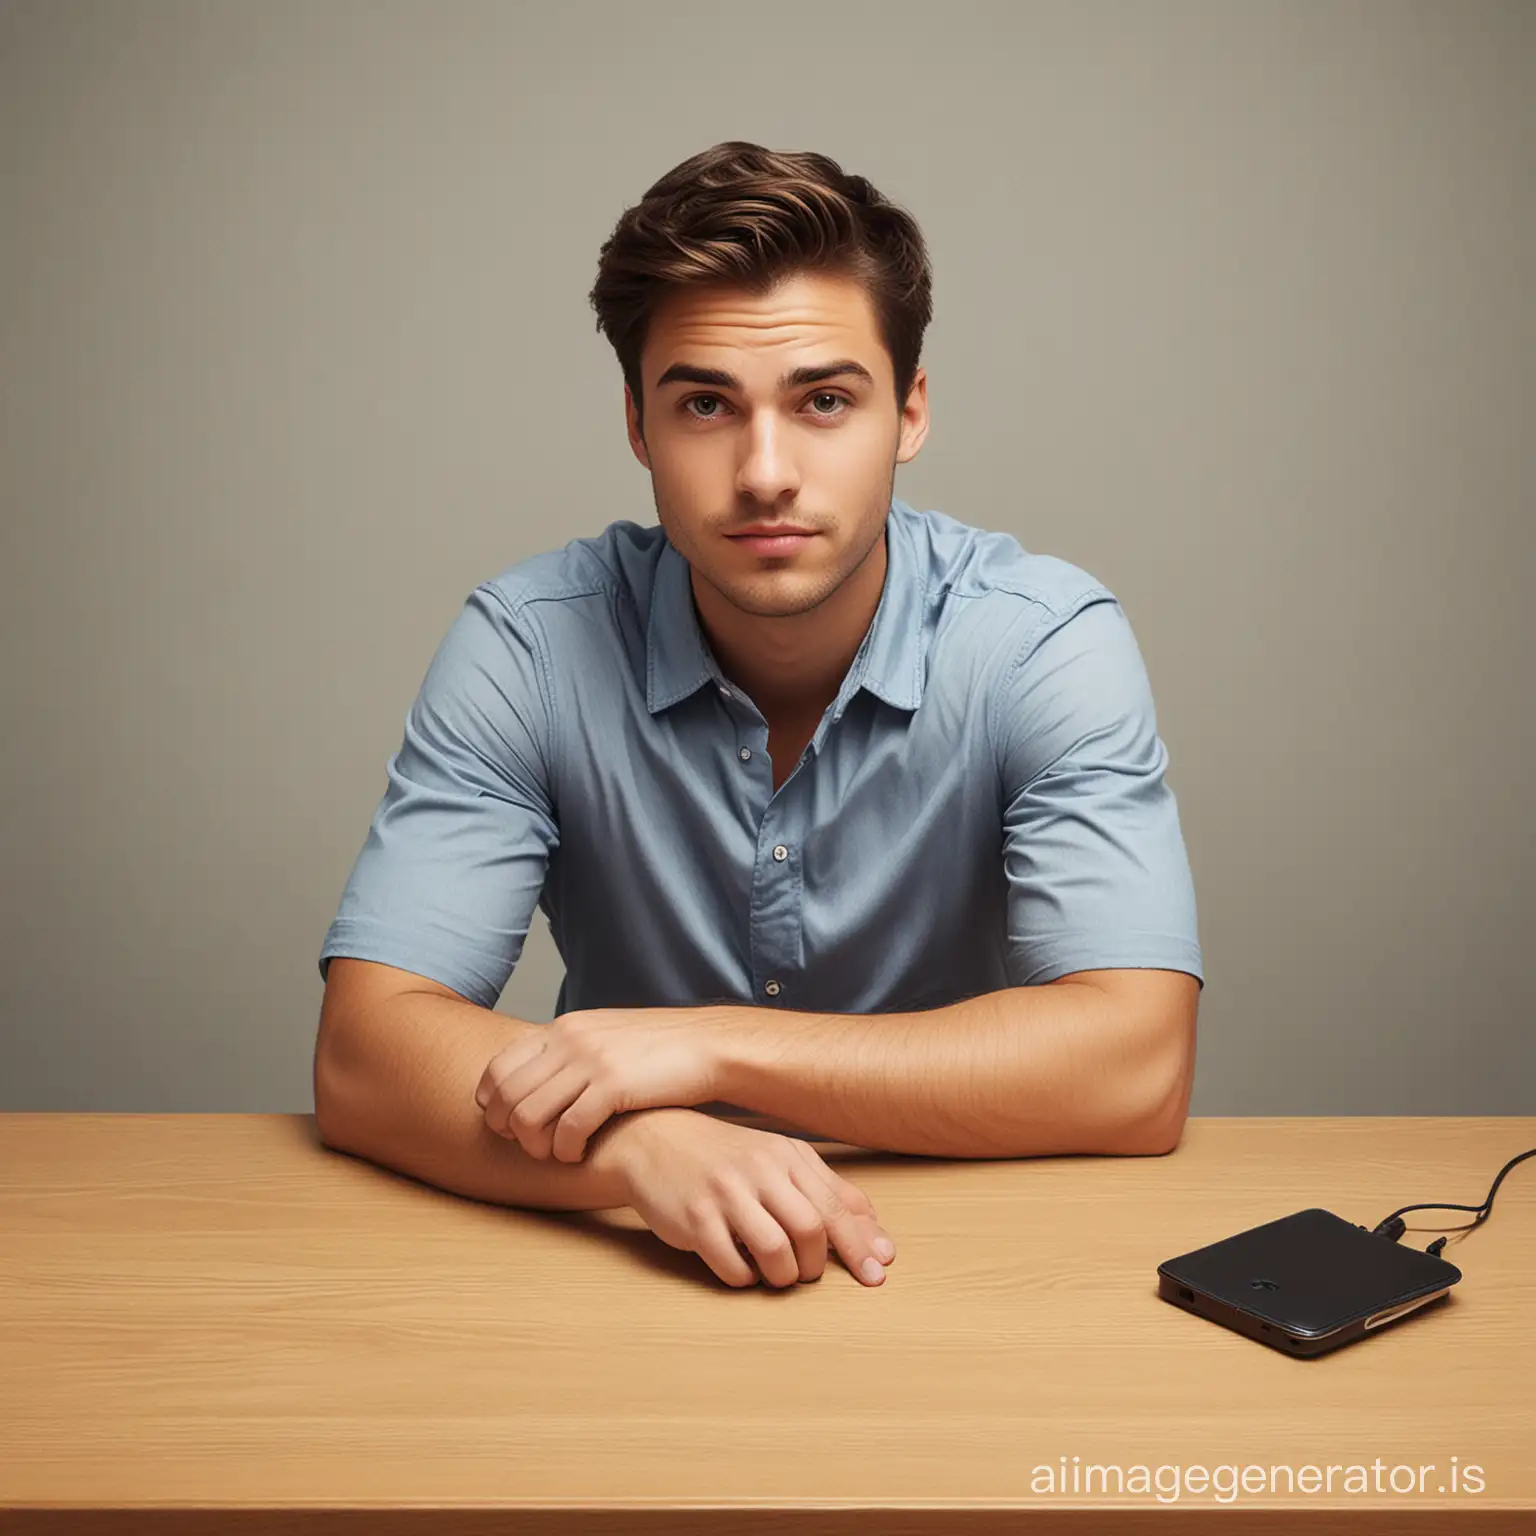 Focused-Man-Working-at-Desk-with-Computer